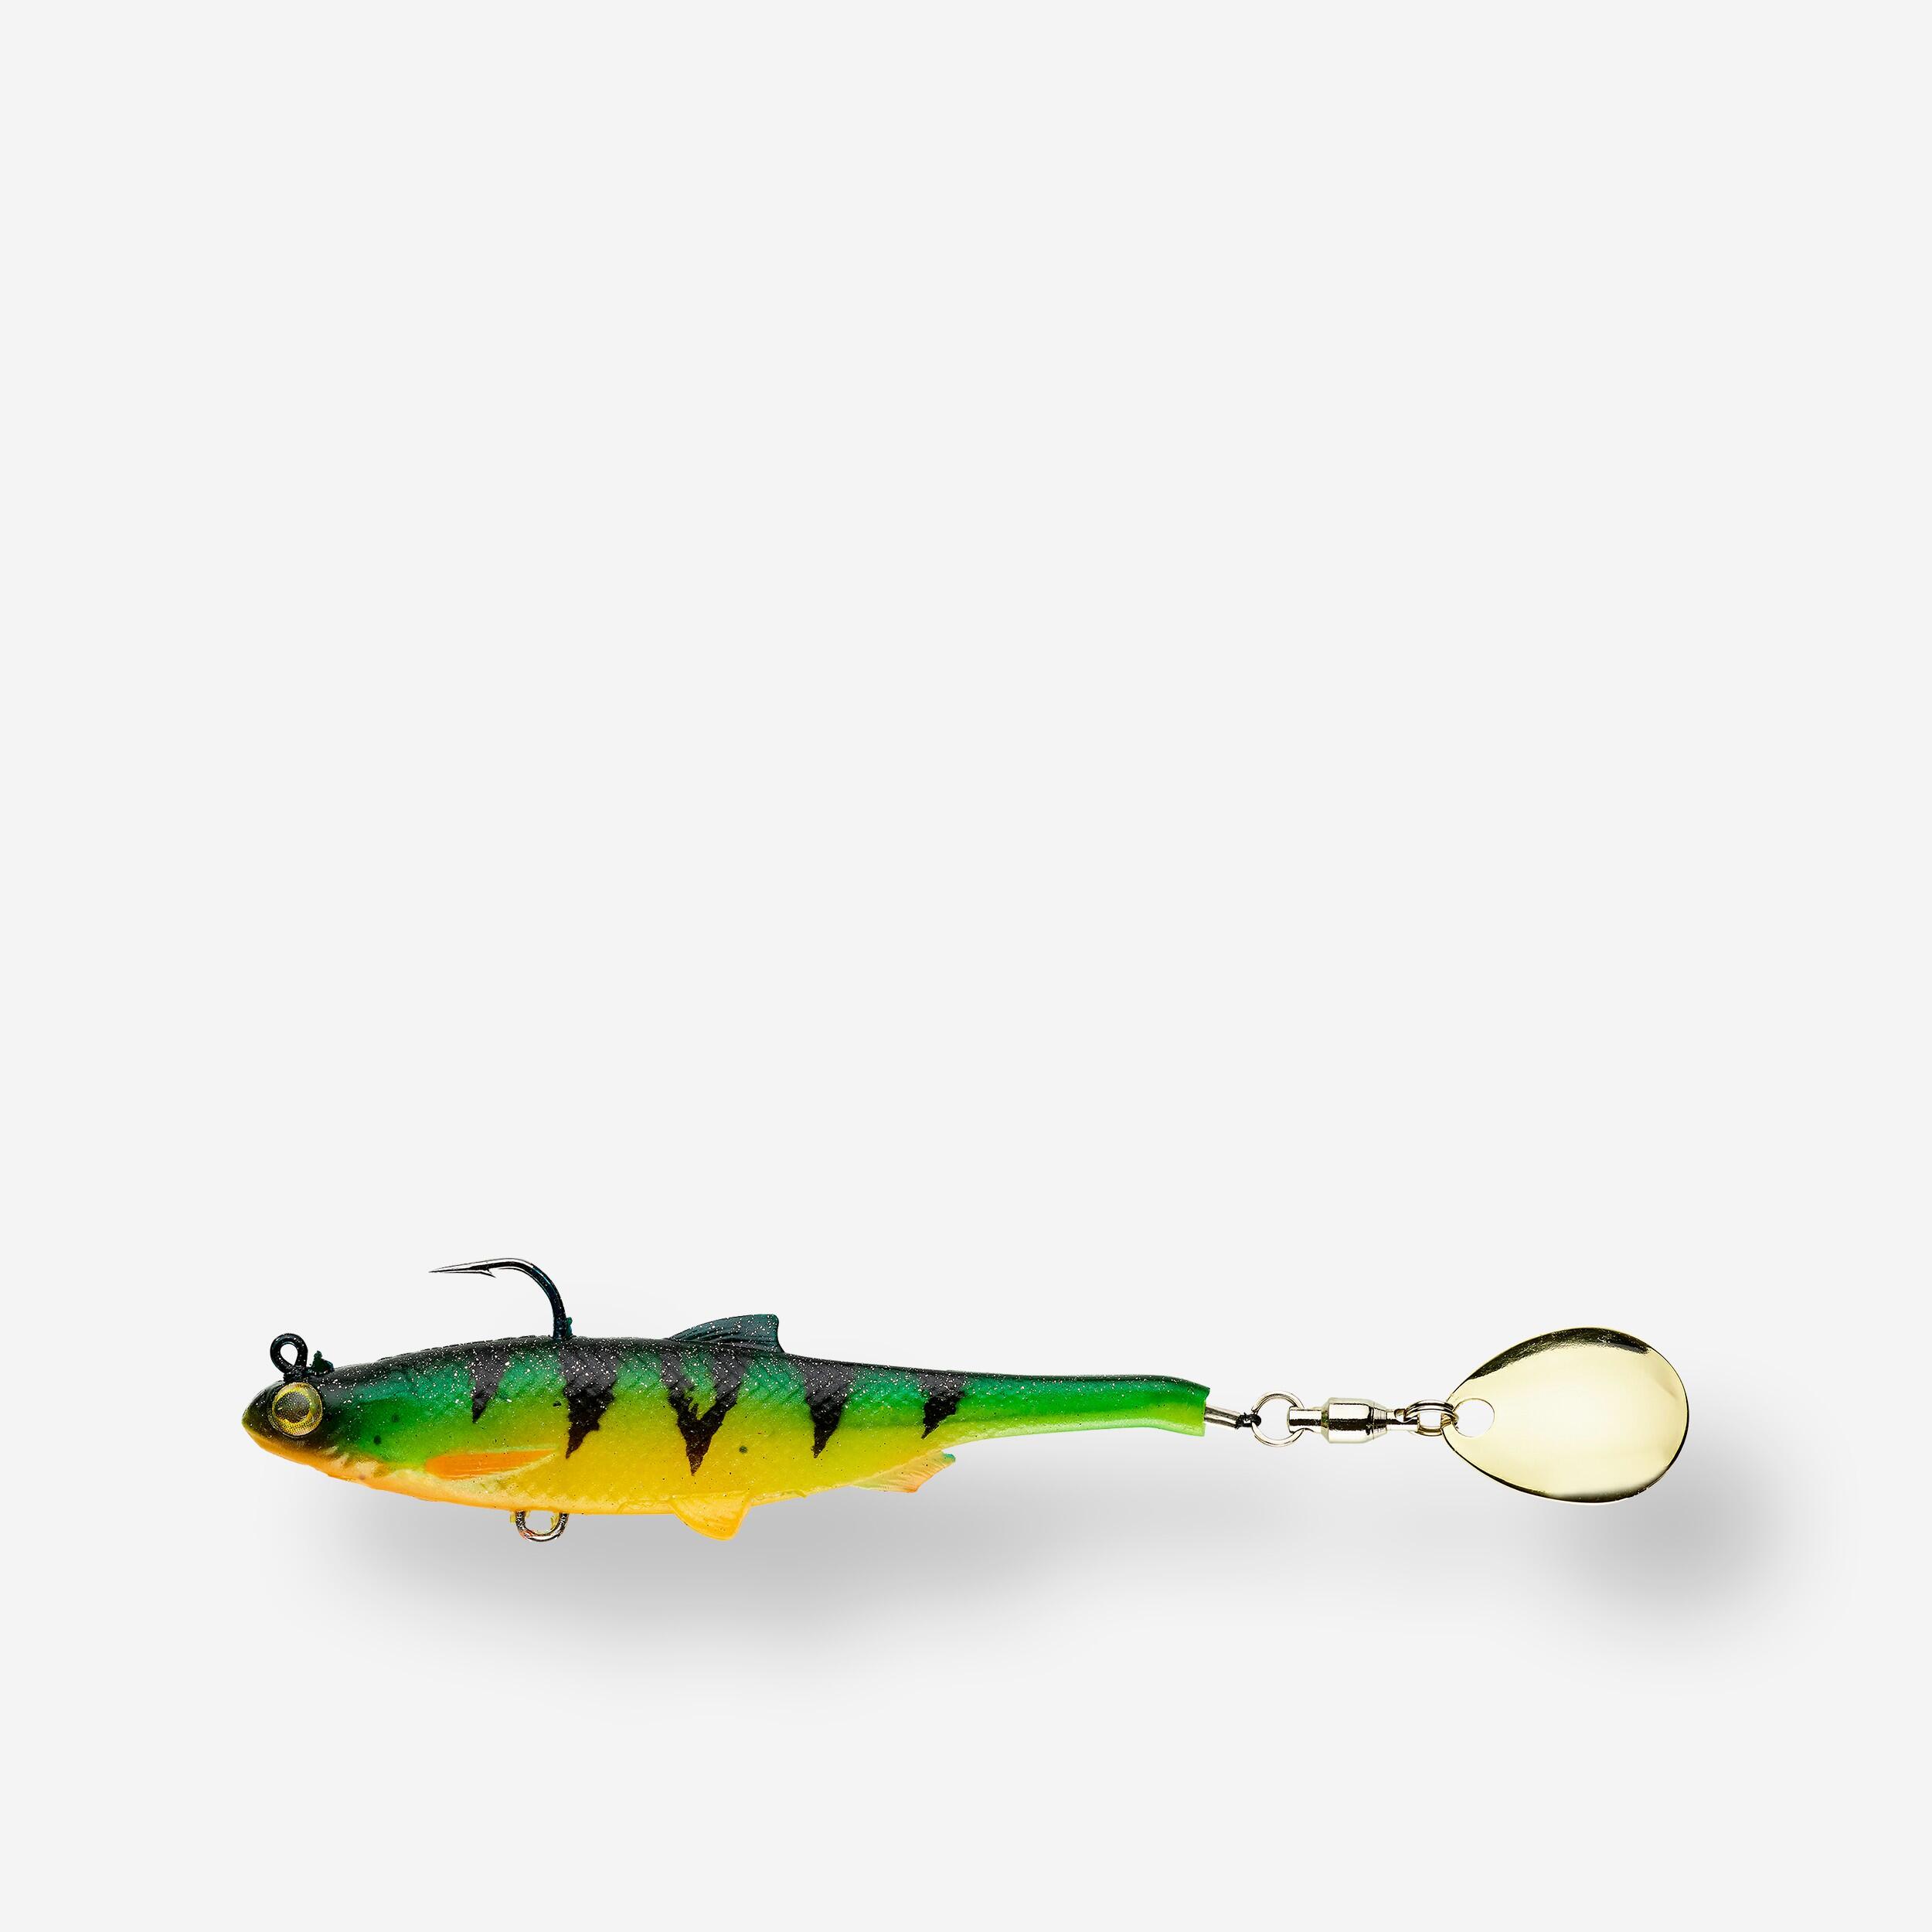 LURE FISHING ROACHSPIN 70 FIRETIGER BLADED SHAD SOFT LURE CAPERLAN